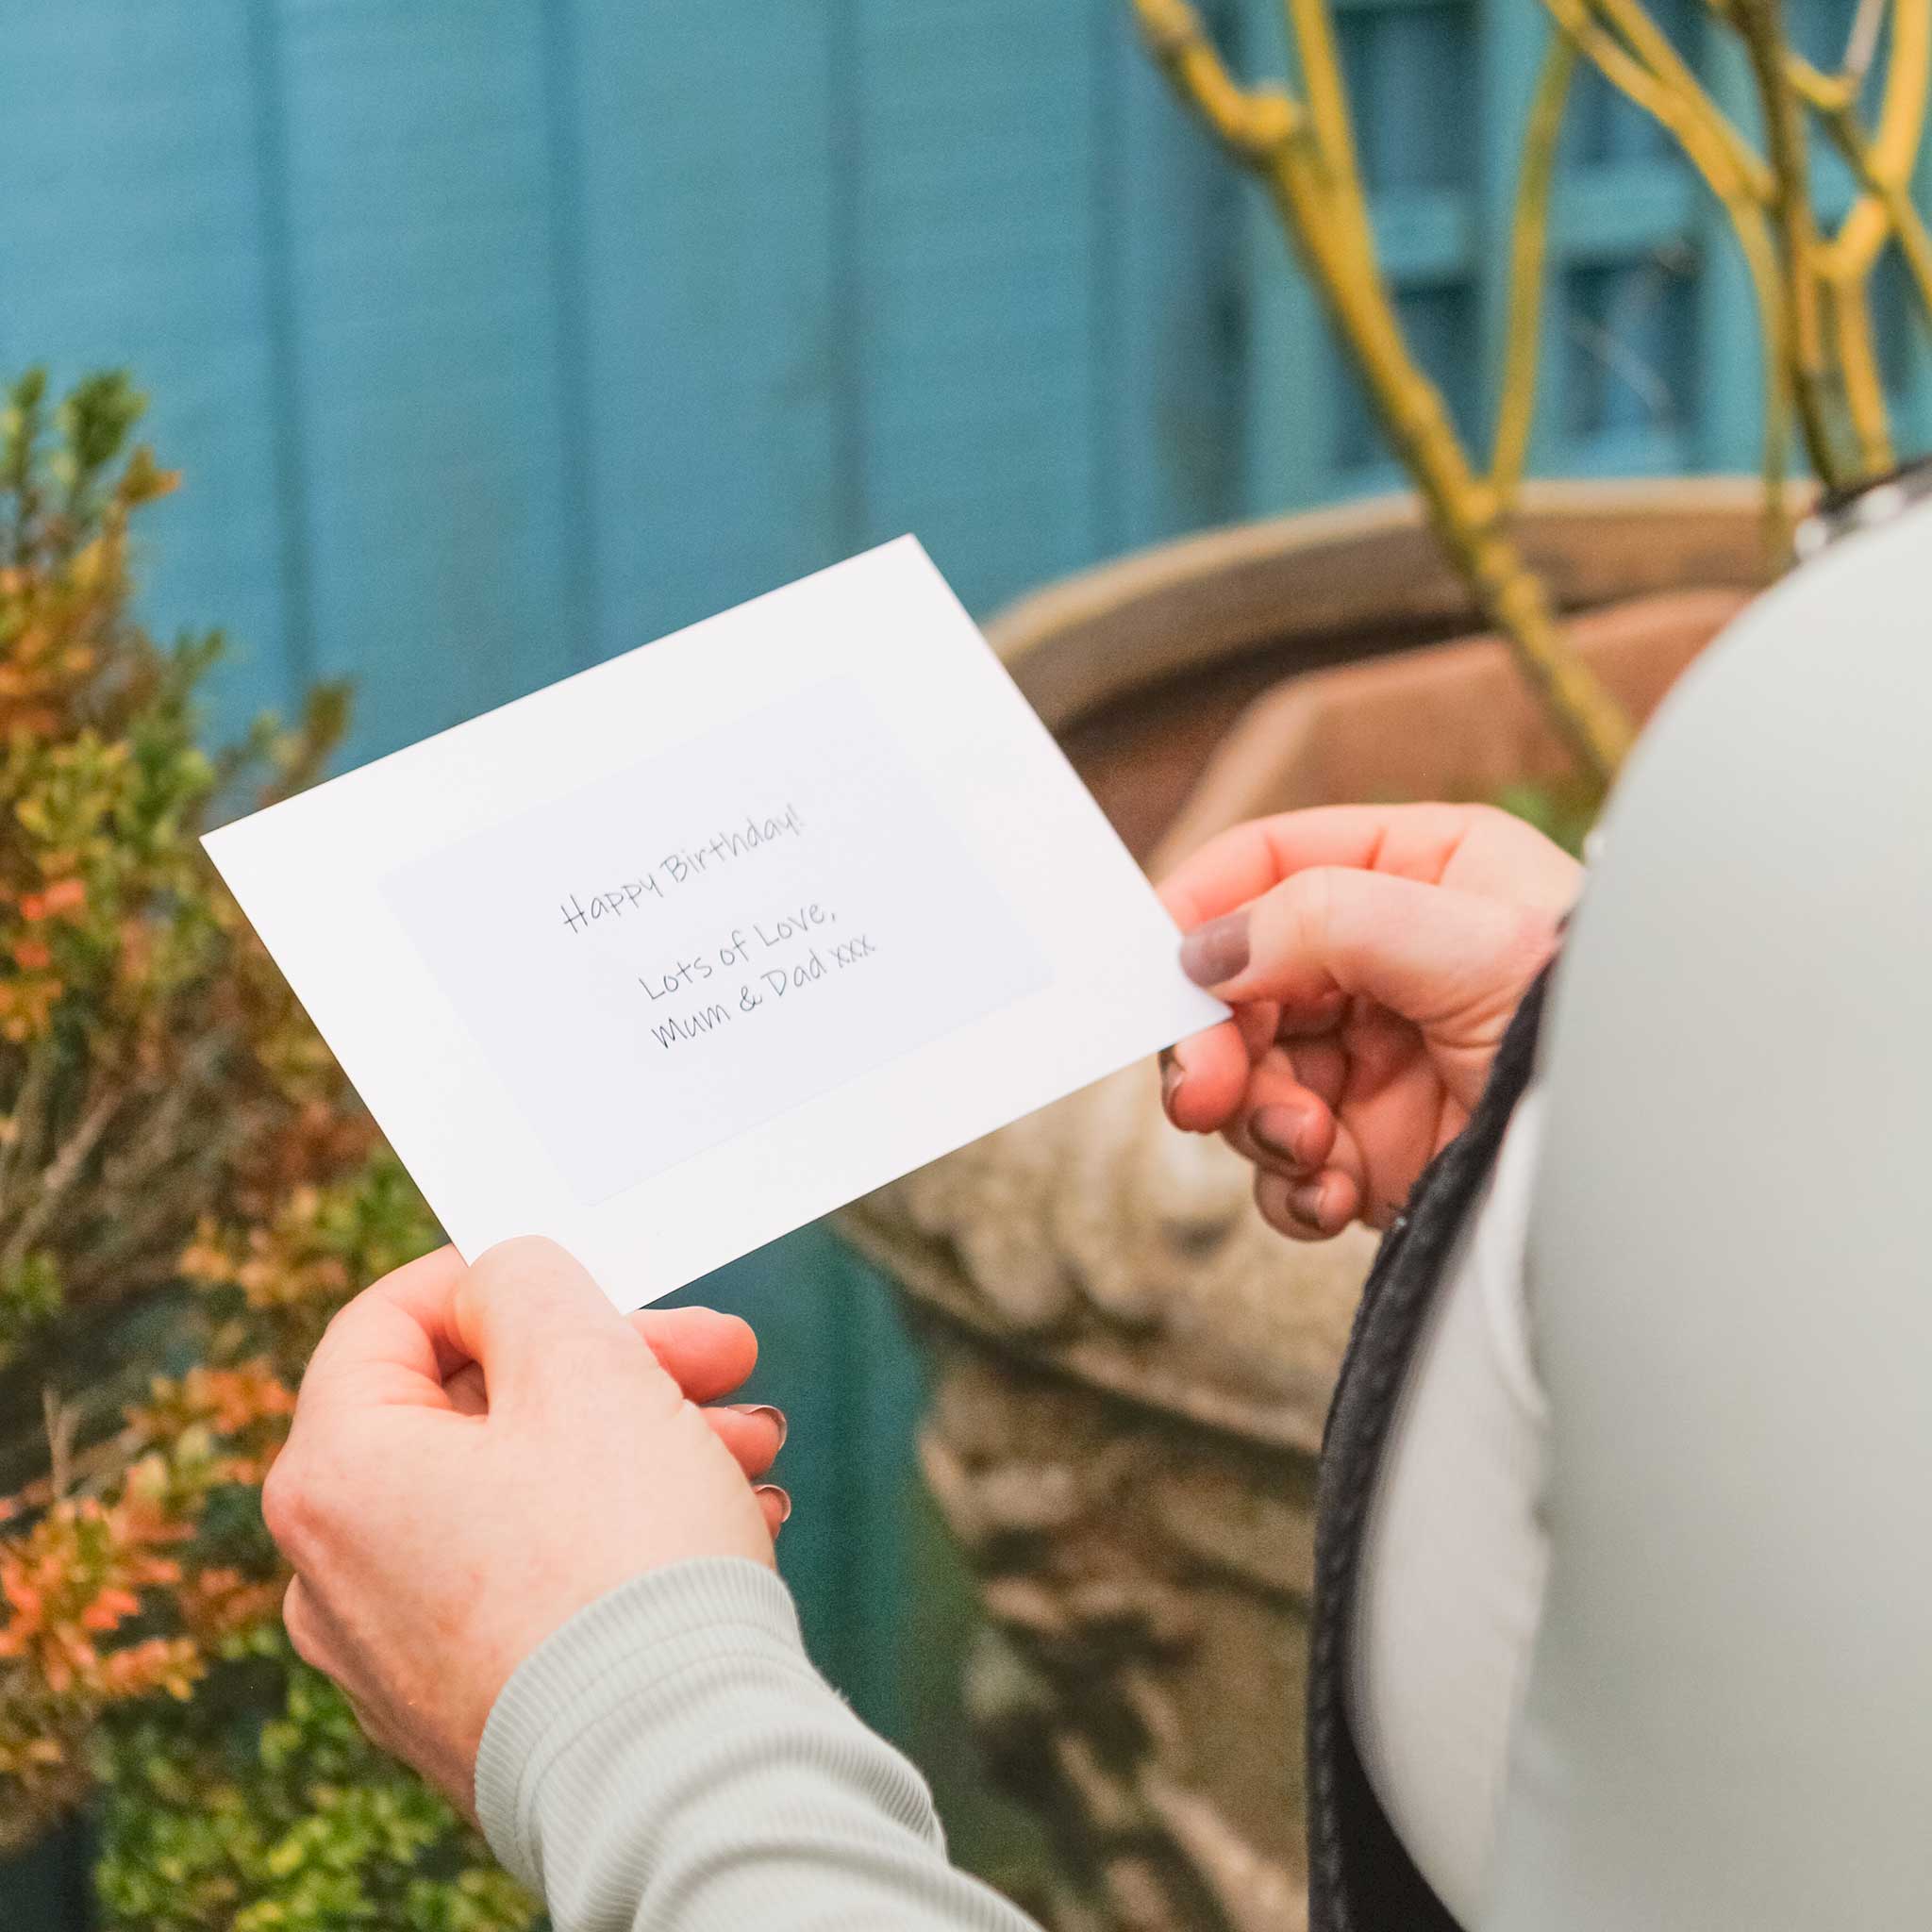 Send a message with a hand-written gift card